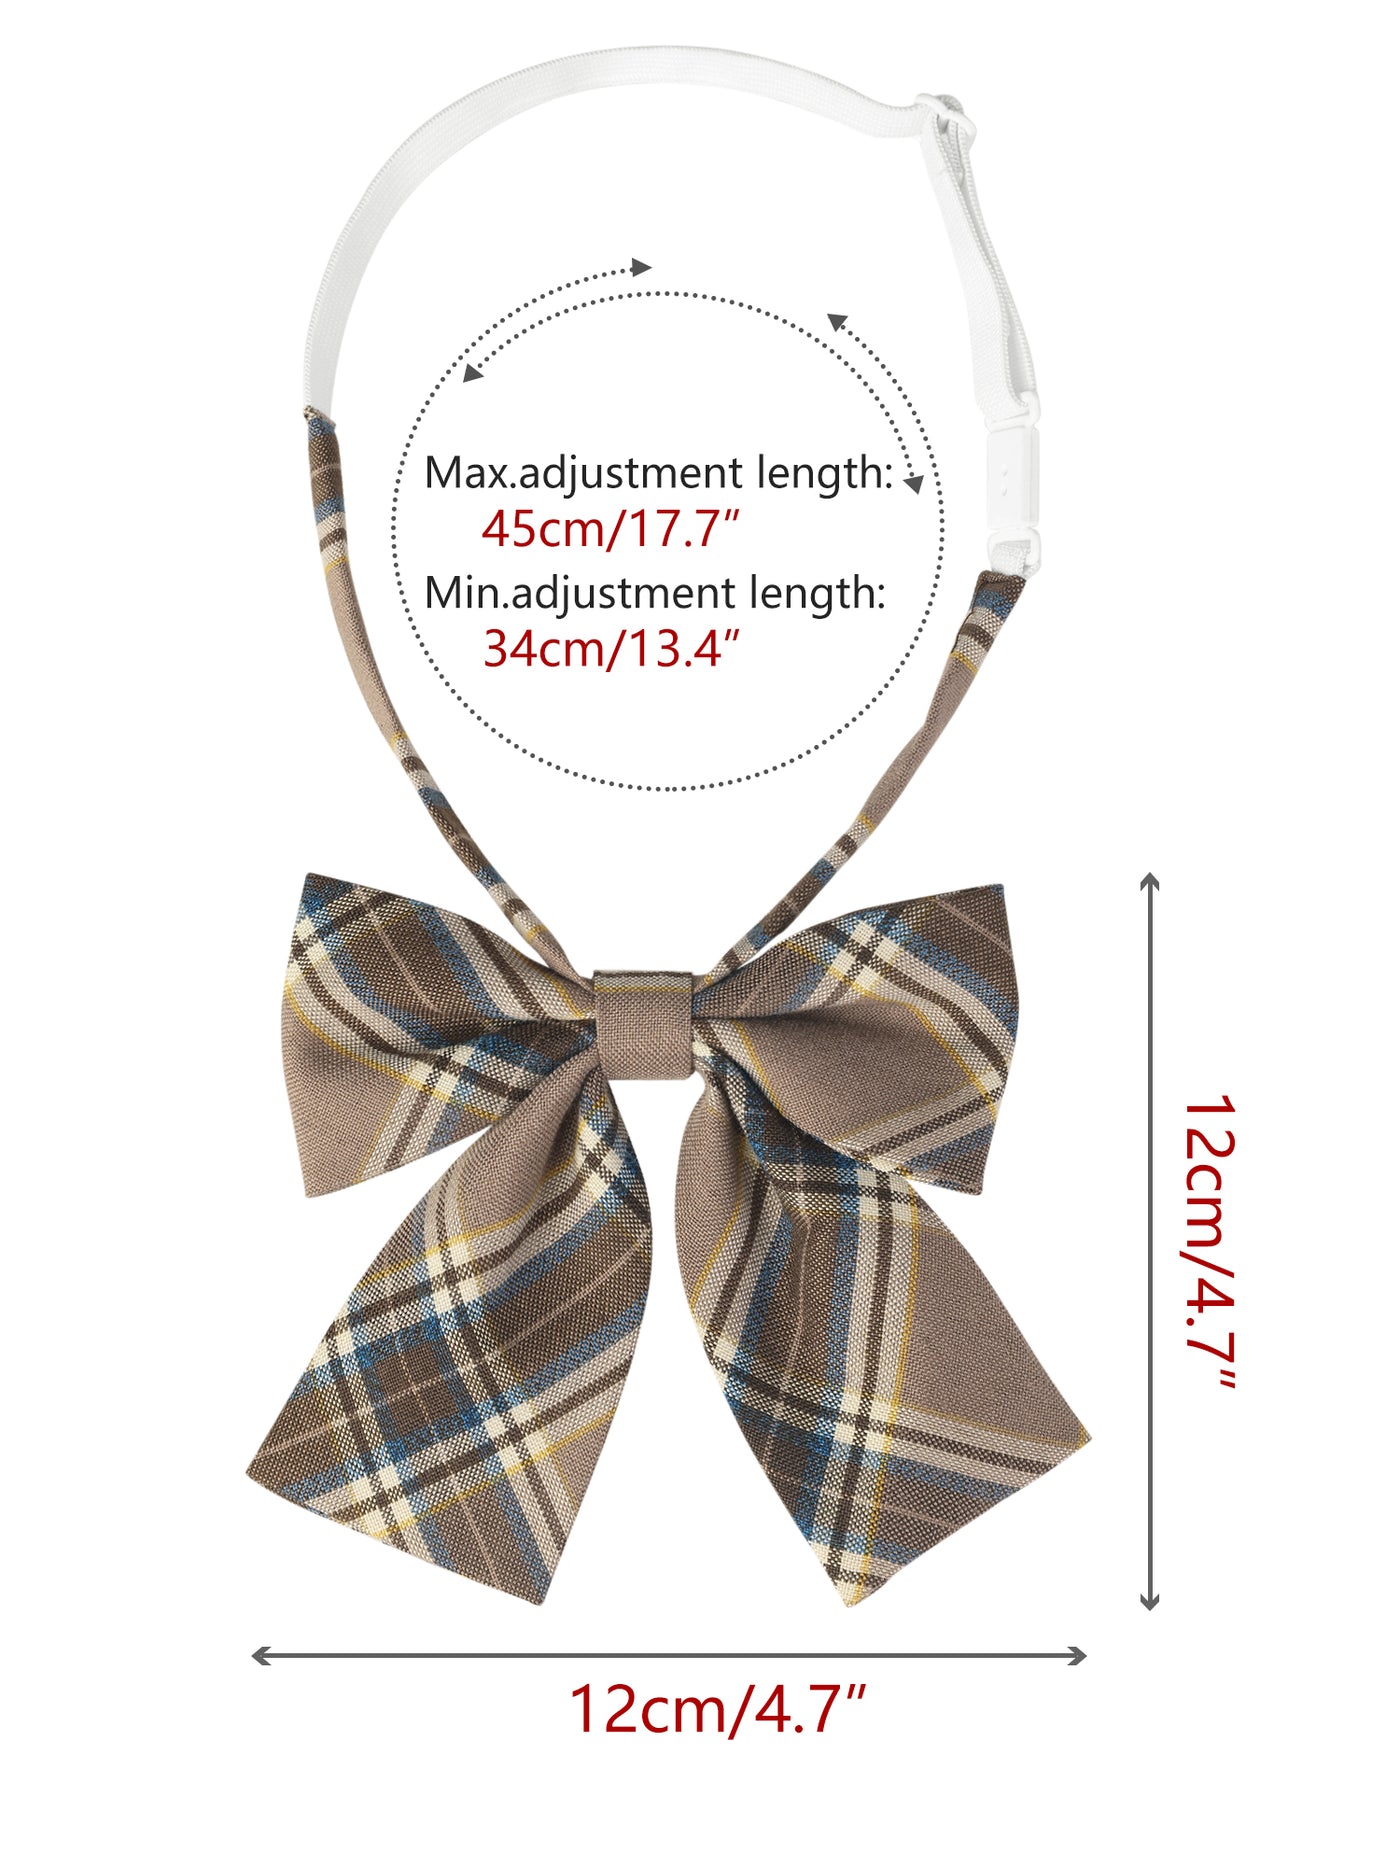 Bublédon Women's Bow Ties Plaid Cotton Pre-tied Funny Bowties for Party Costume